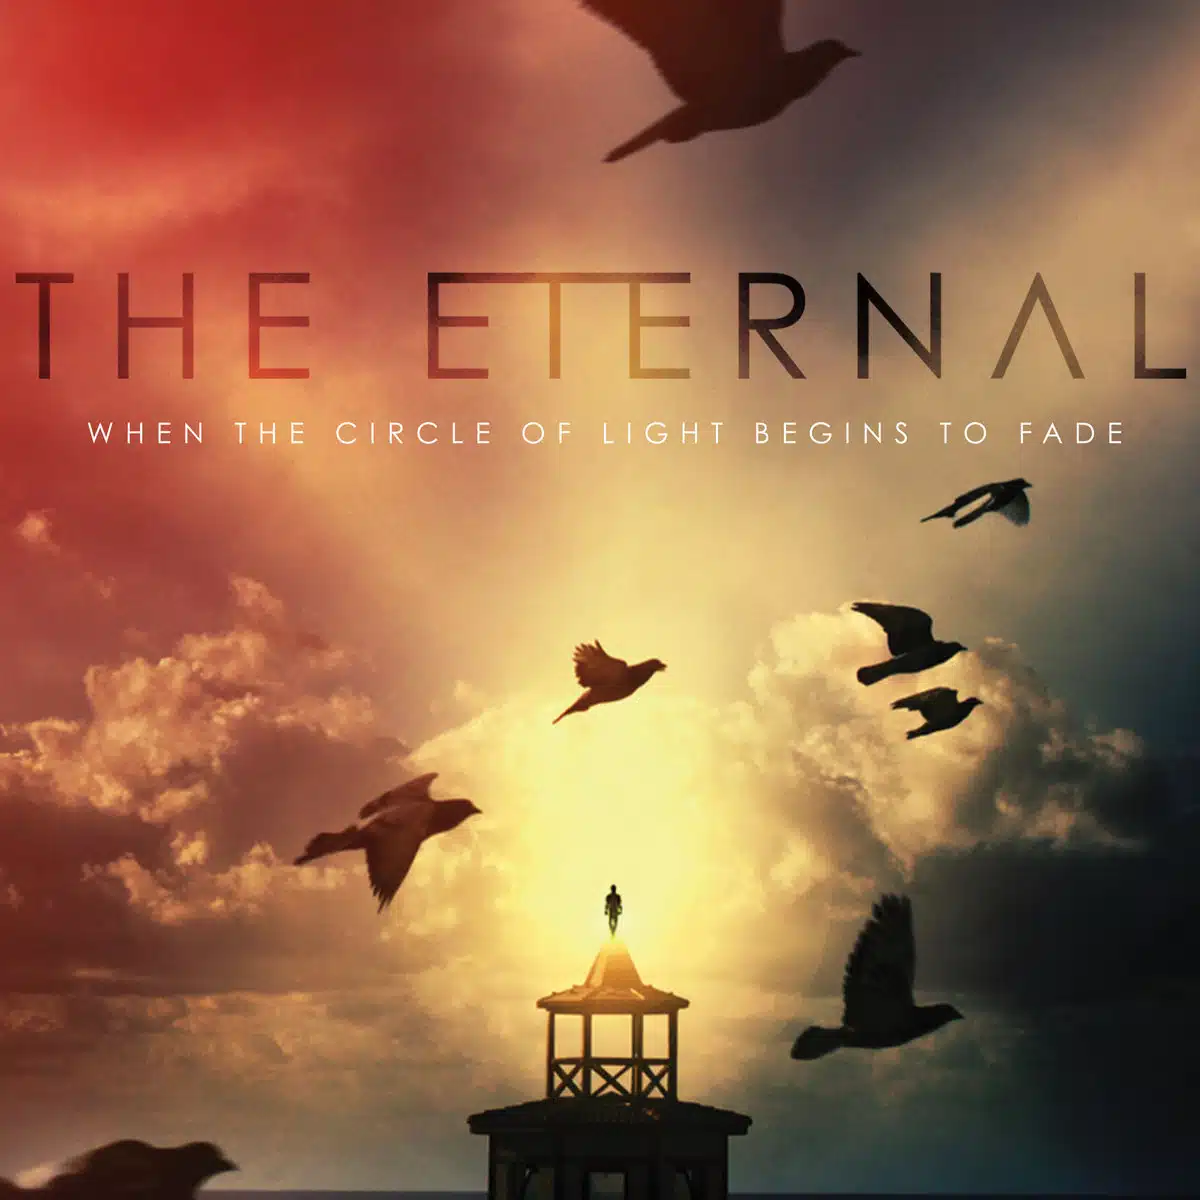 The Eternal - When the circles of light begin to fade